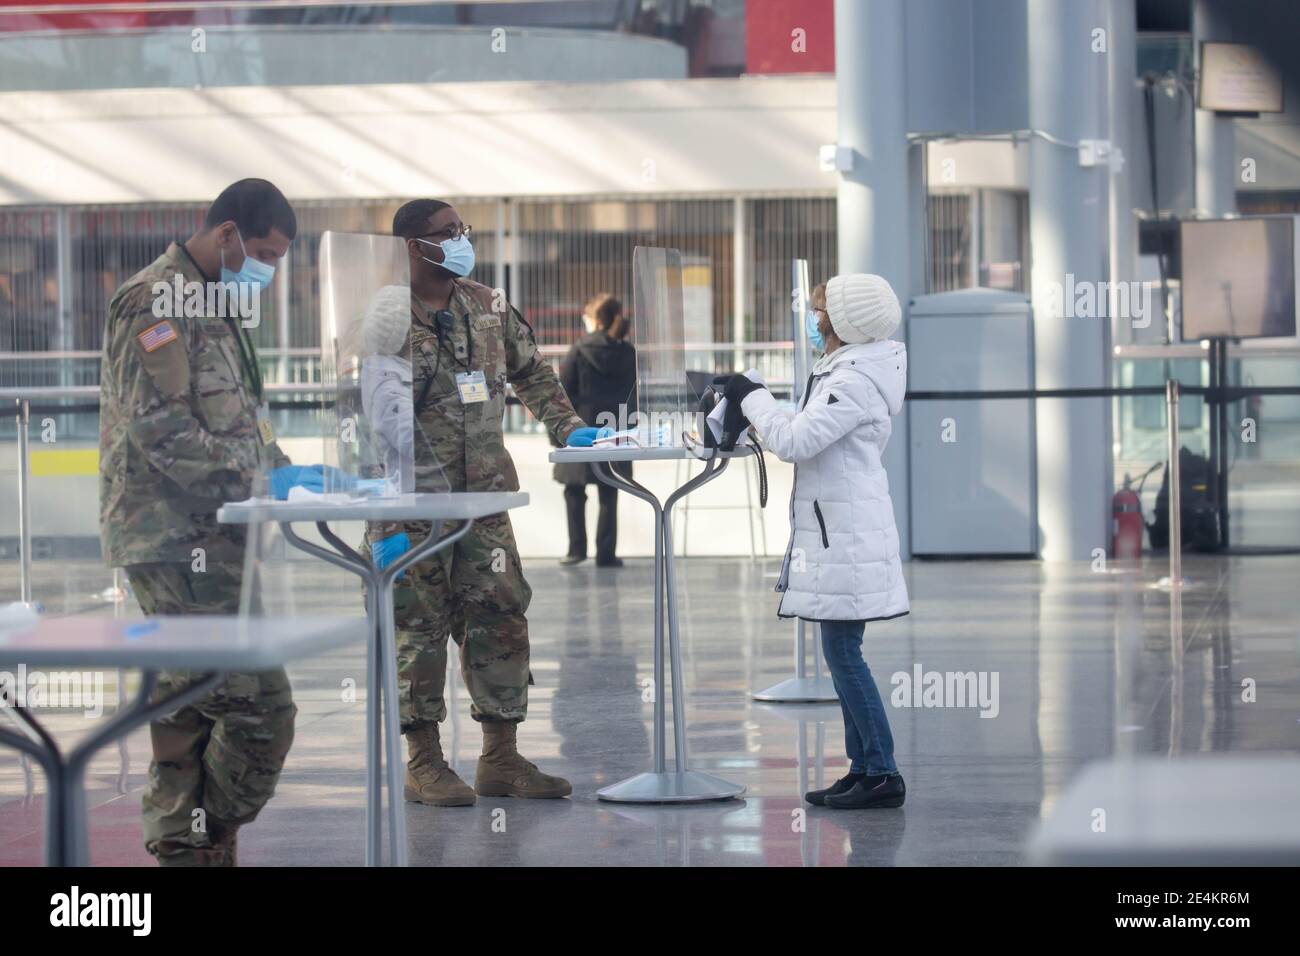 New York, USA. 23rd Jan, 2021. National Guard members assist people at a COVID-19 vaccination center at the Jacob K. Javits Convention Center in New York, the United States, Jan. 23, 2021. The total number of confirmed COVID-19 cases in the United States topped 24.99 million, according to the data released by Johns Hopkins University on Saturday. Credit: Michael Nagle/Xinhua/Alamy Live News Stock Photo